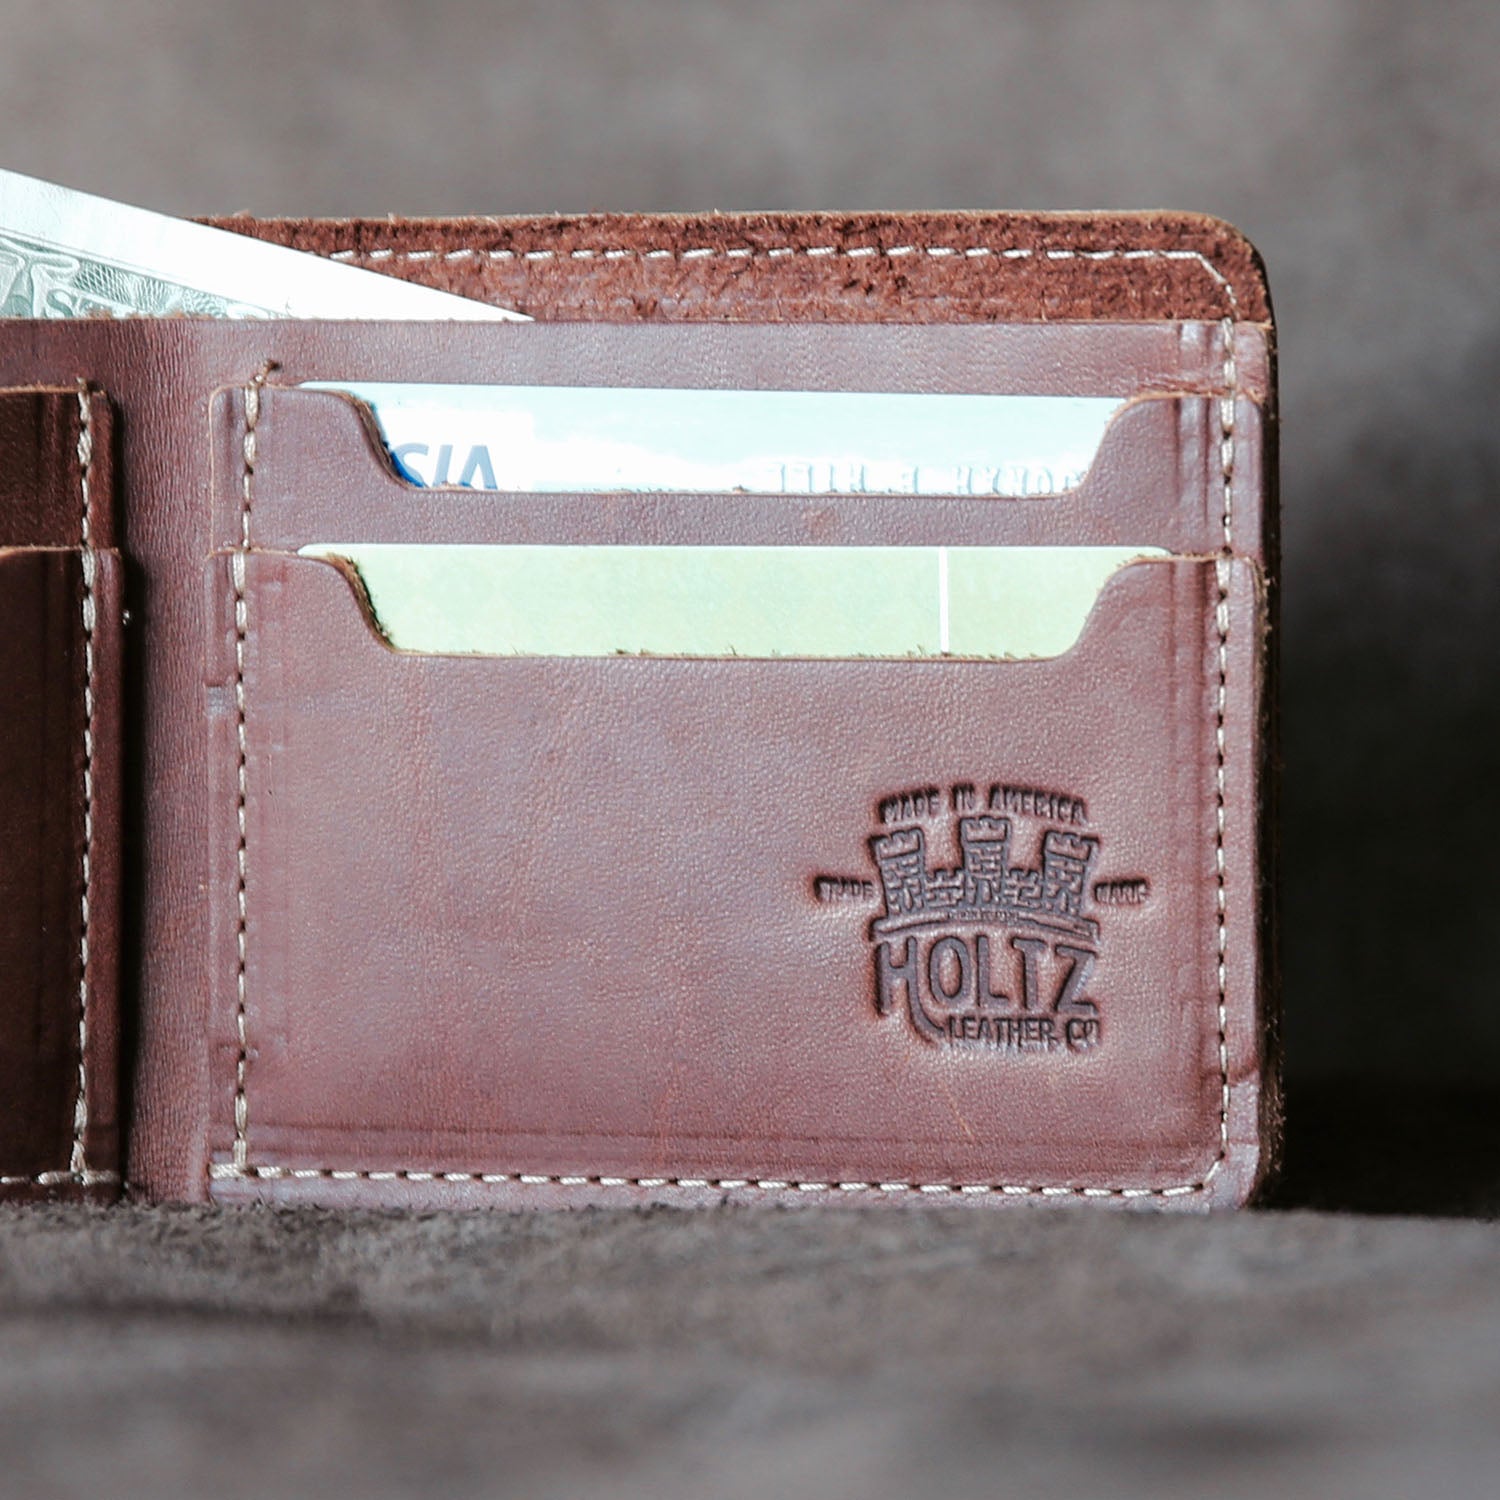 Fine leather bifold wallet with personalized initials and Marine Corps logo at Holtz Leather Co in Huntsville, Alabama